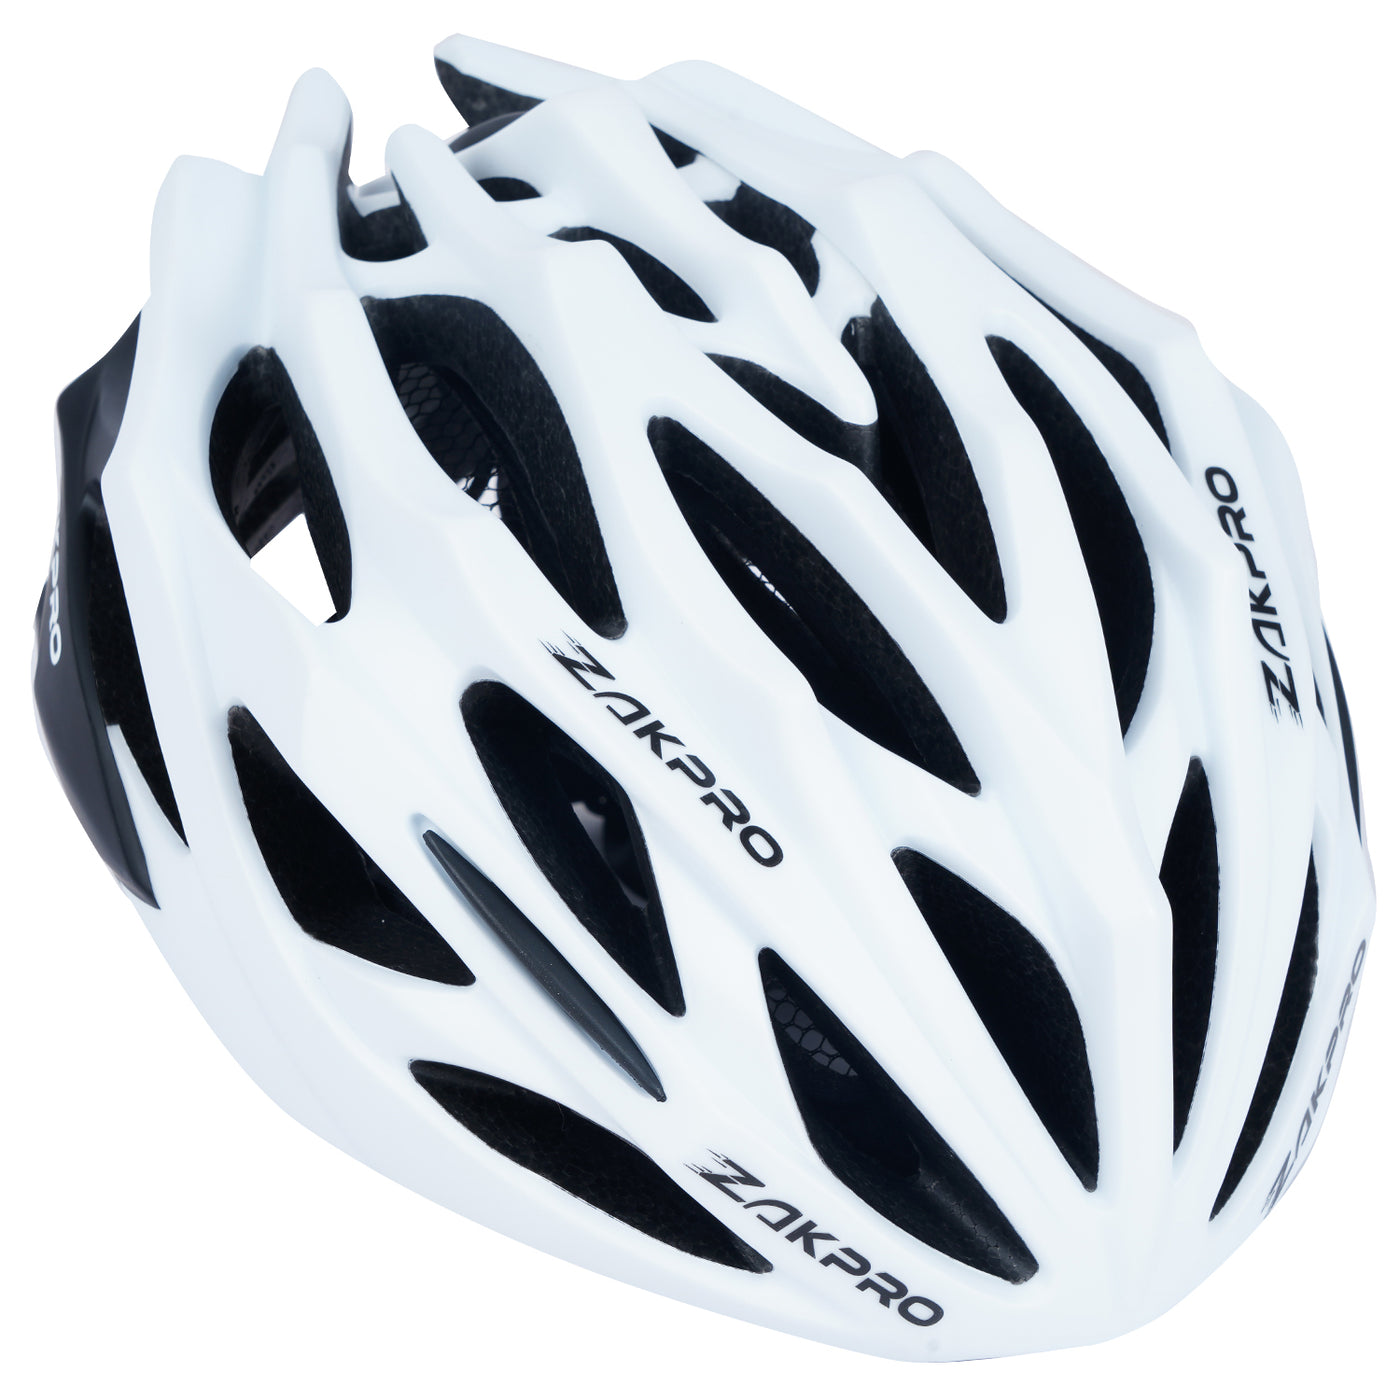 Zakpro Signature Road Cycling Helmet (White)